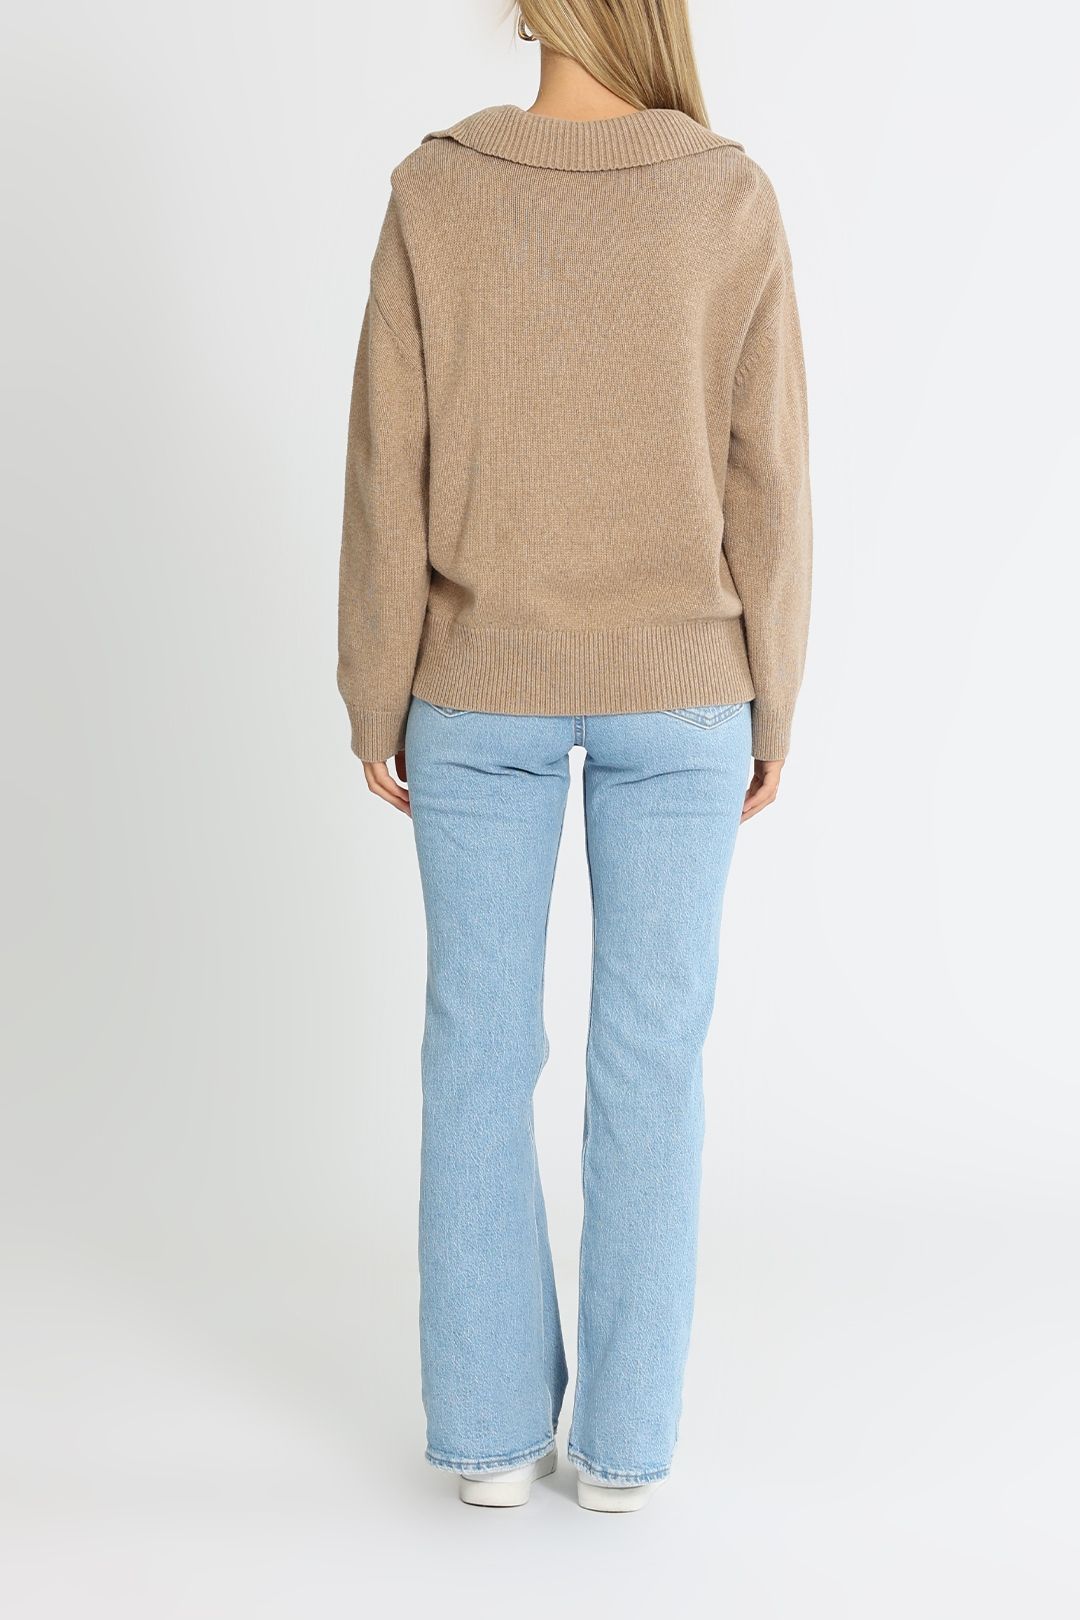 Elka Collective Lucien Knit Camel Relaxed Fit